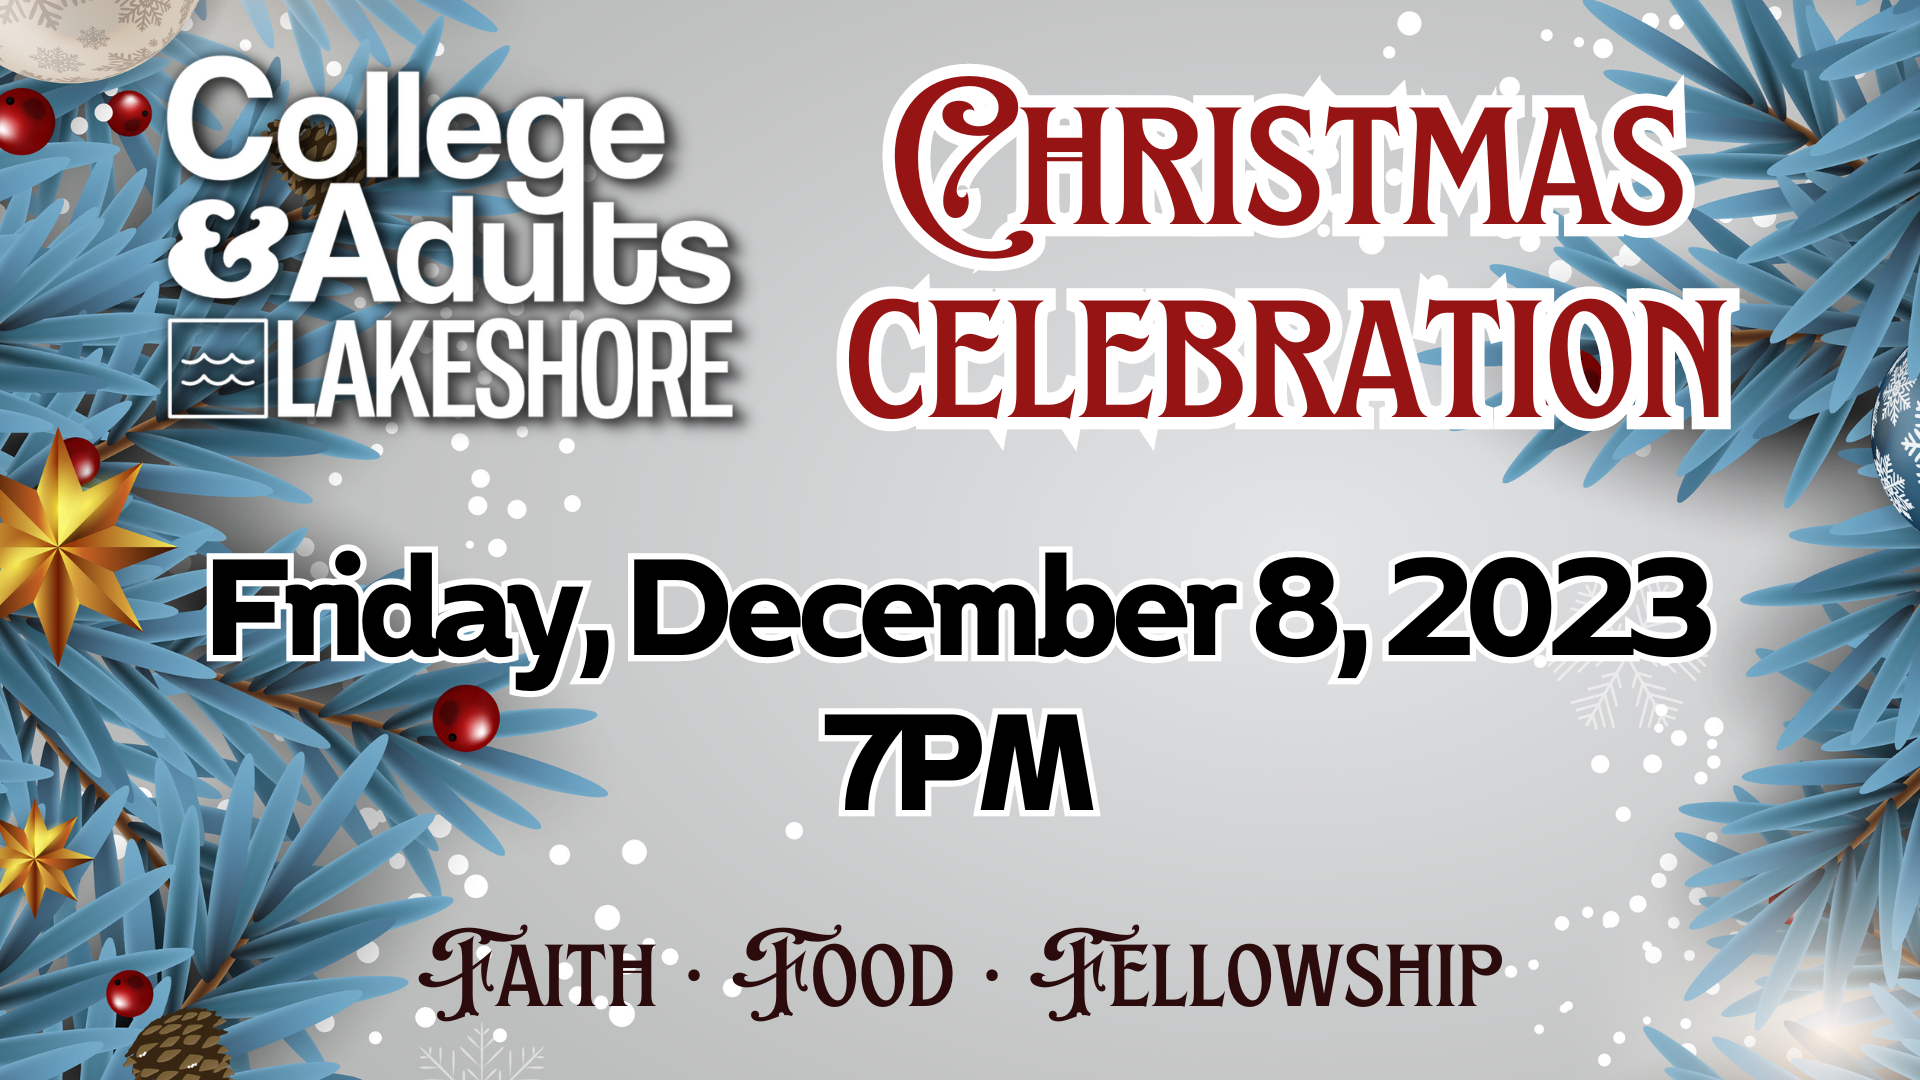 Featured image for “College & Adults Christmas Celebration”